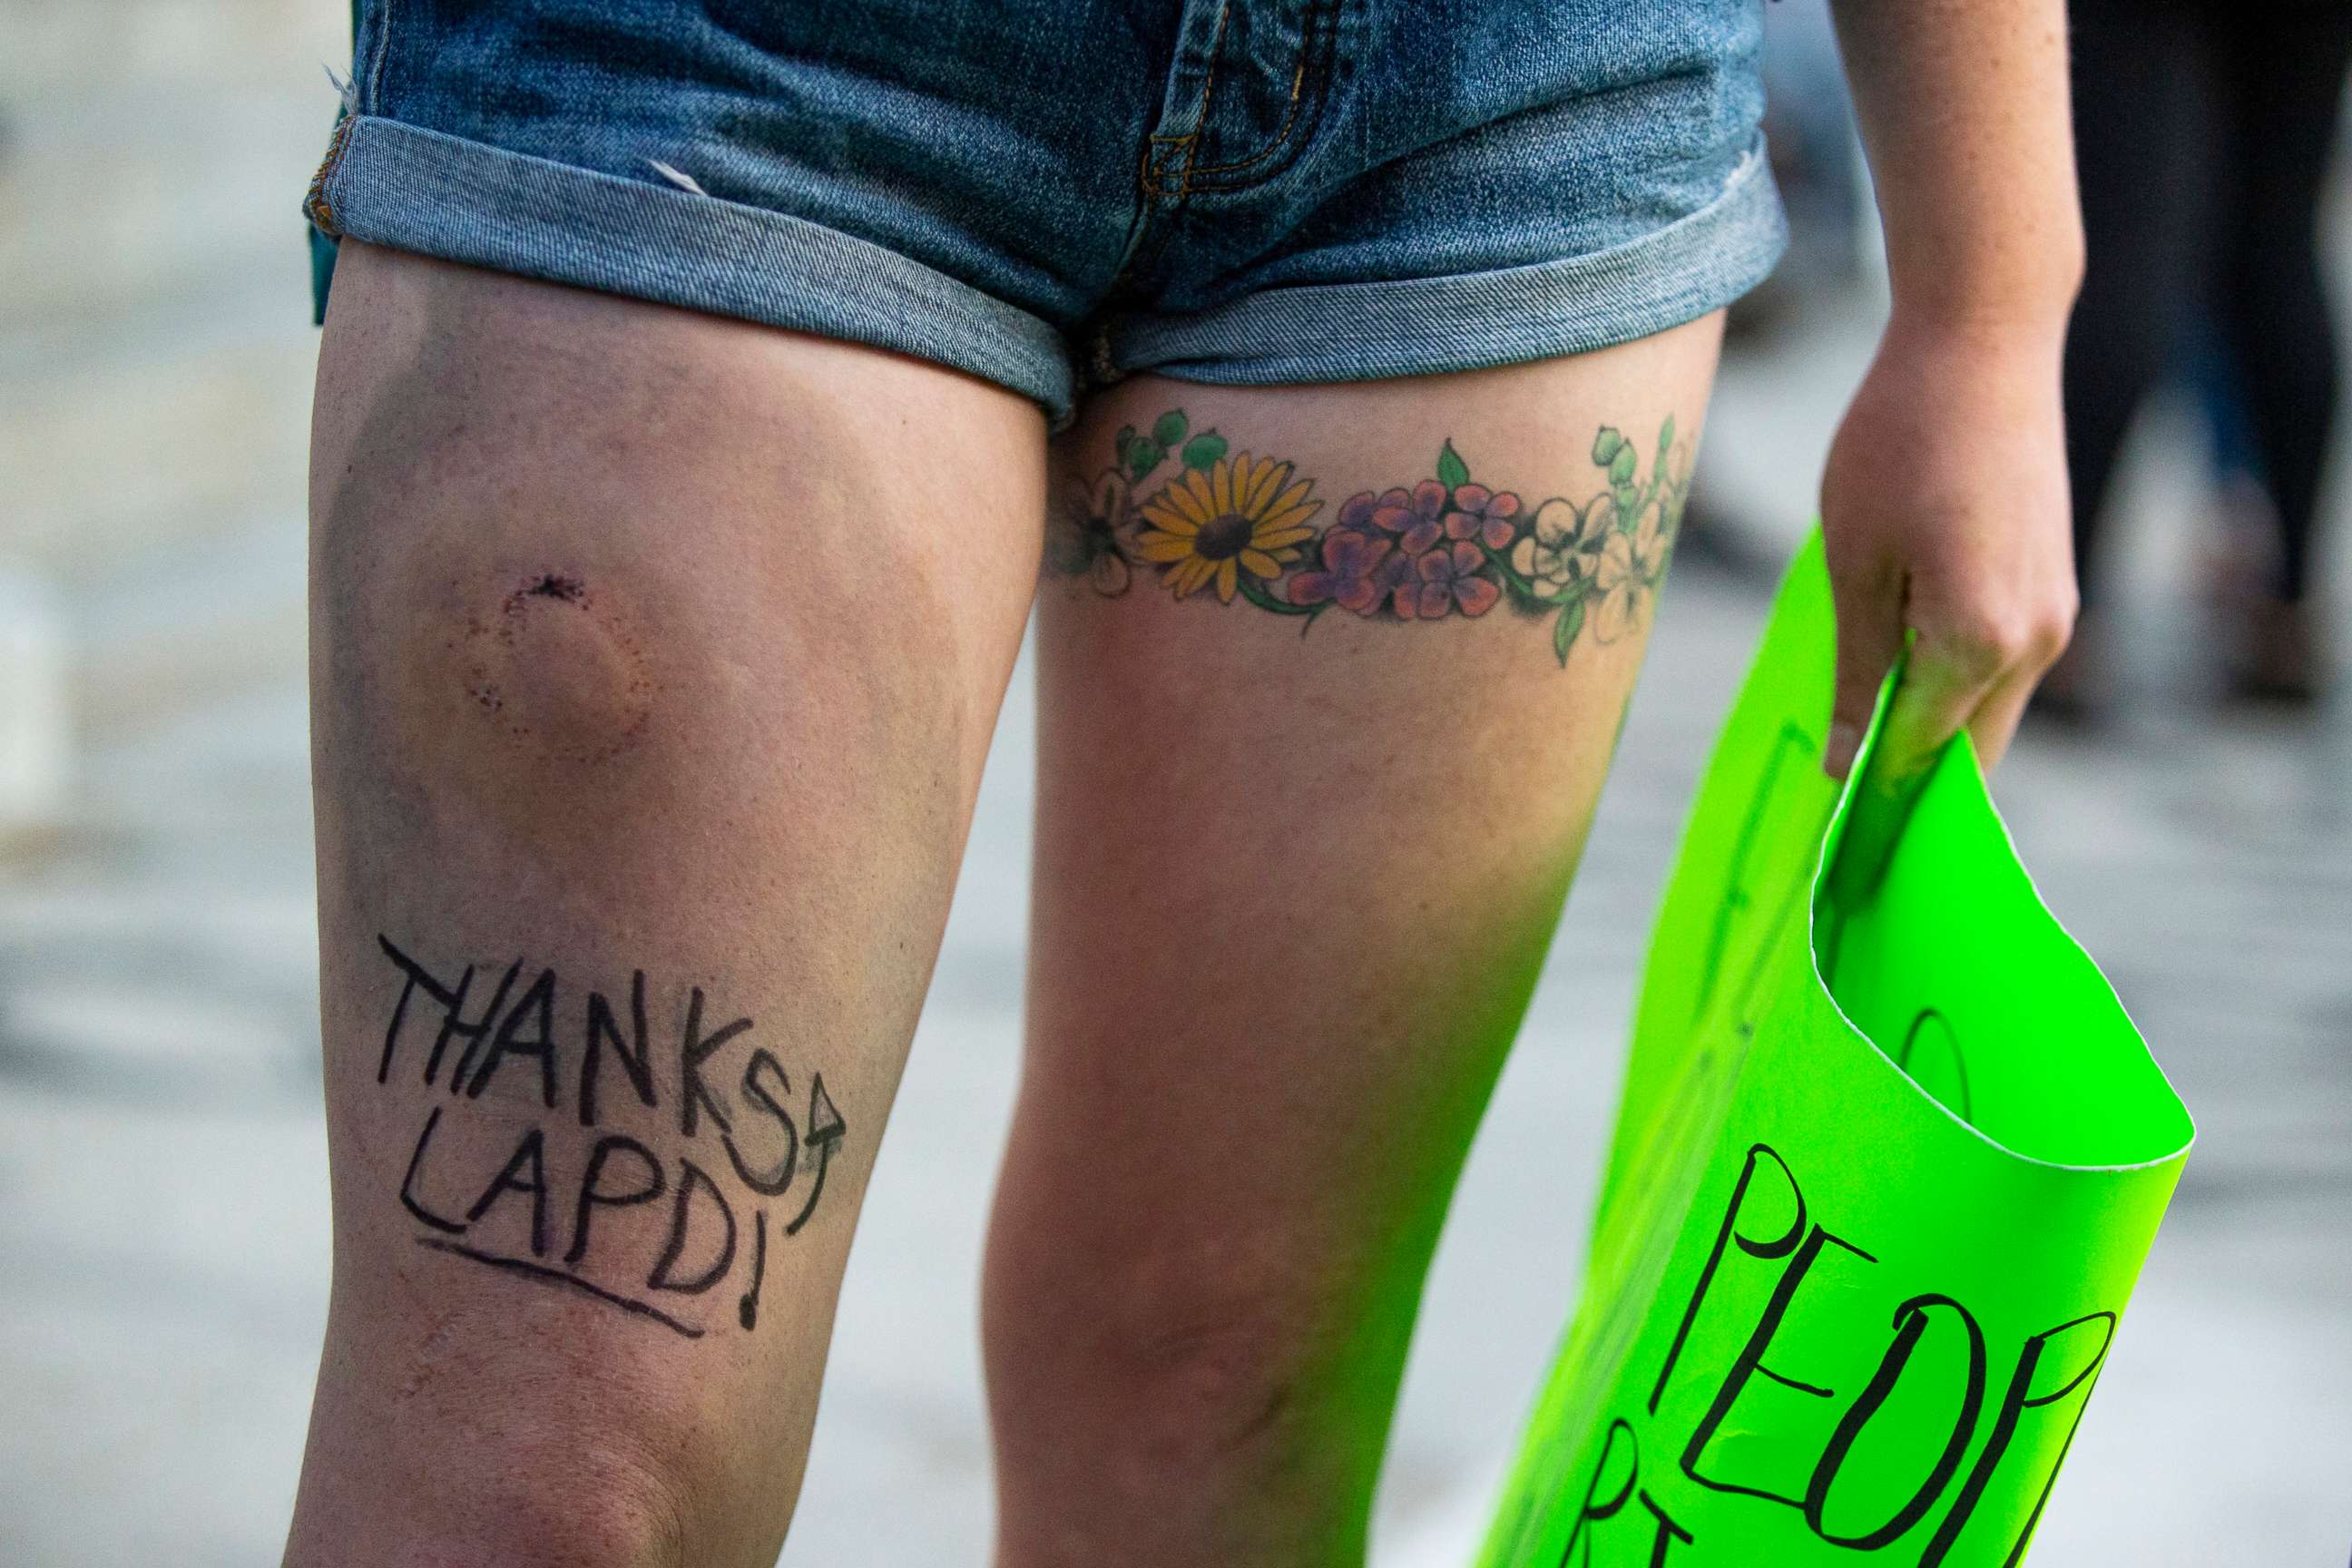 PHOTO: Demonstrator Colleen Jane, draws attention to a hematoma she says was inflicted by a police officer's rubber bullet, by writing "Thanks LAPD!" on her right leg during a "Black Lives Matter" rally, June 6, 2020, outside Los Angeles City Hall.